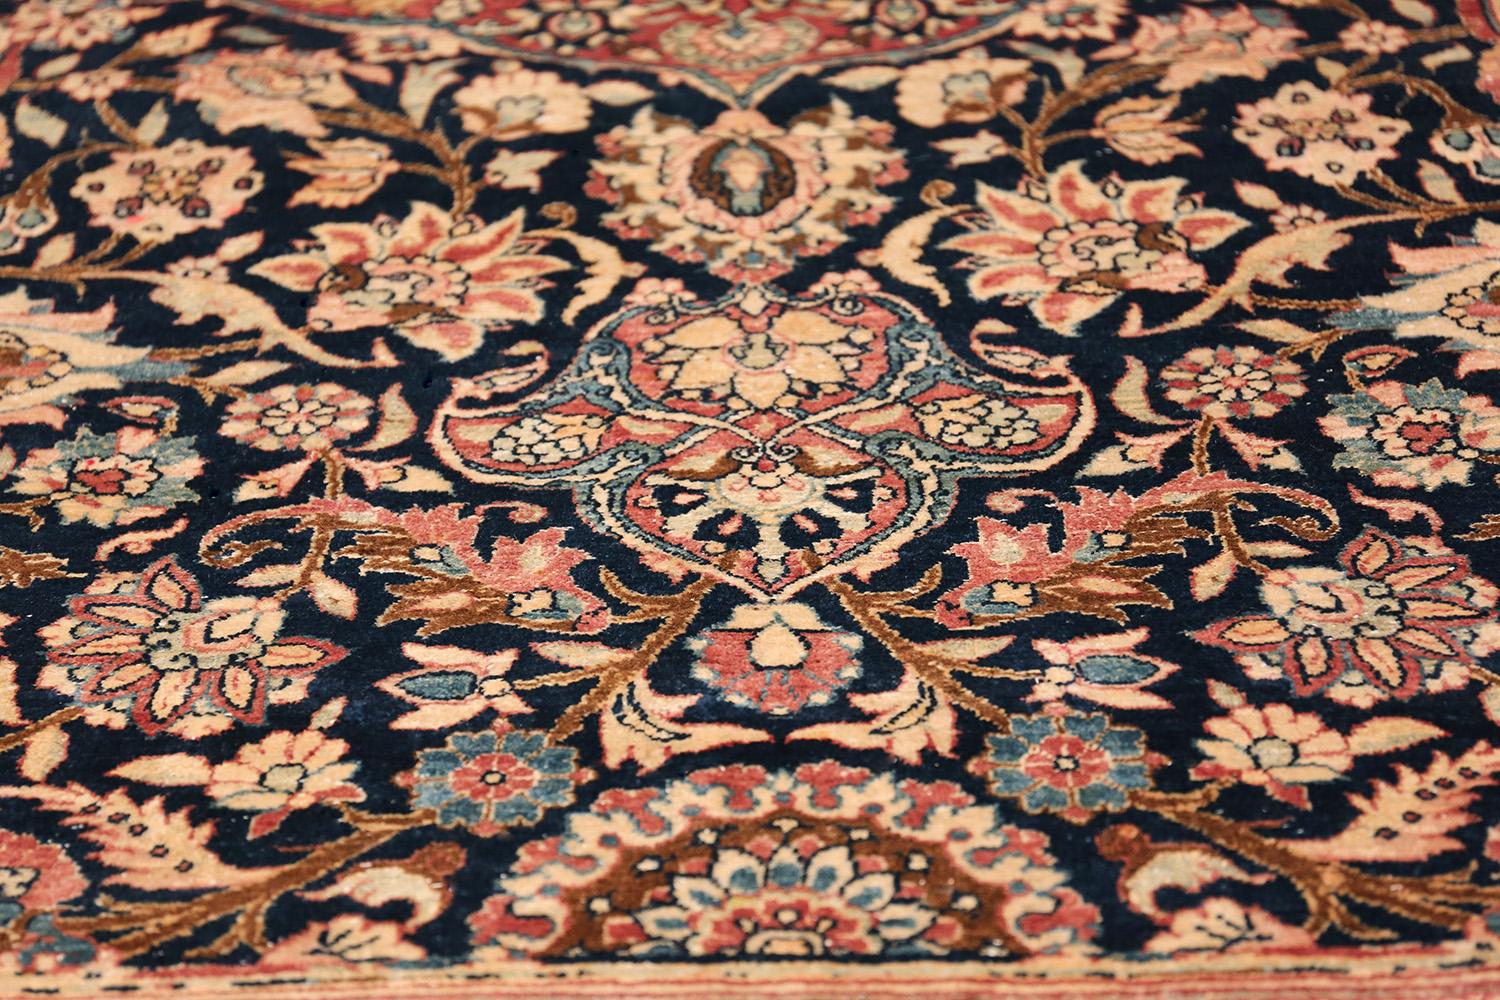 Wool Oversized Antique Tehran Persian Carpet. Size: 14 ft 3 in x 22 ft 3 in